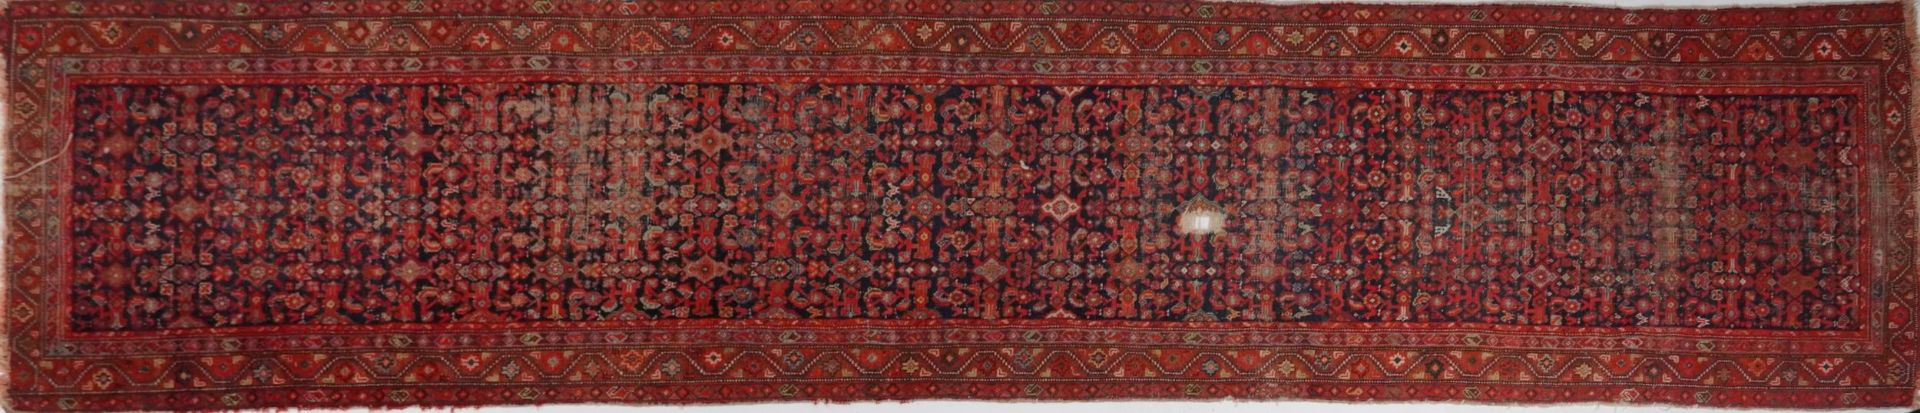 Rectangular Persian red and blue ground carpet runner having an allover floral repeat central field,